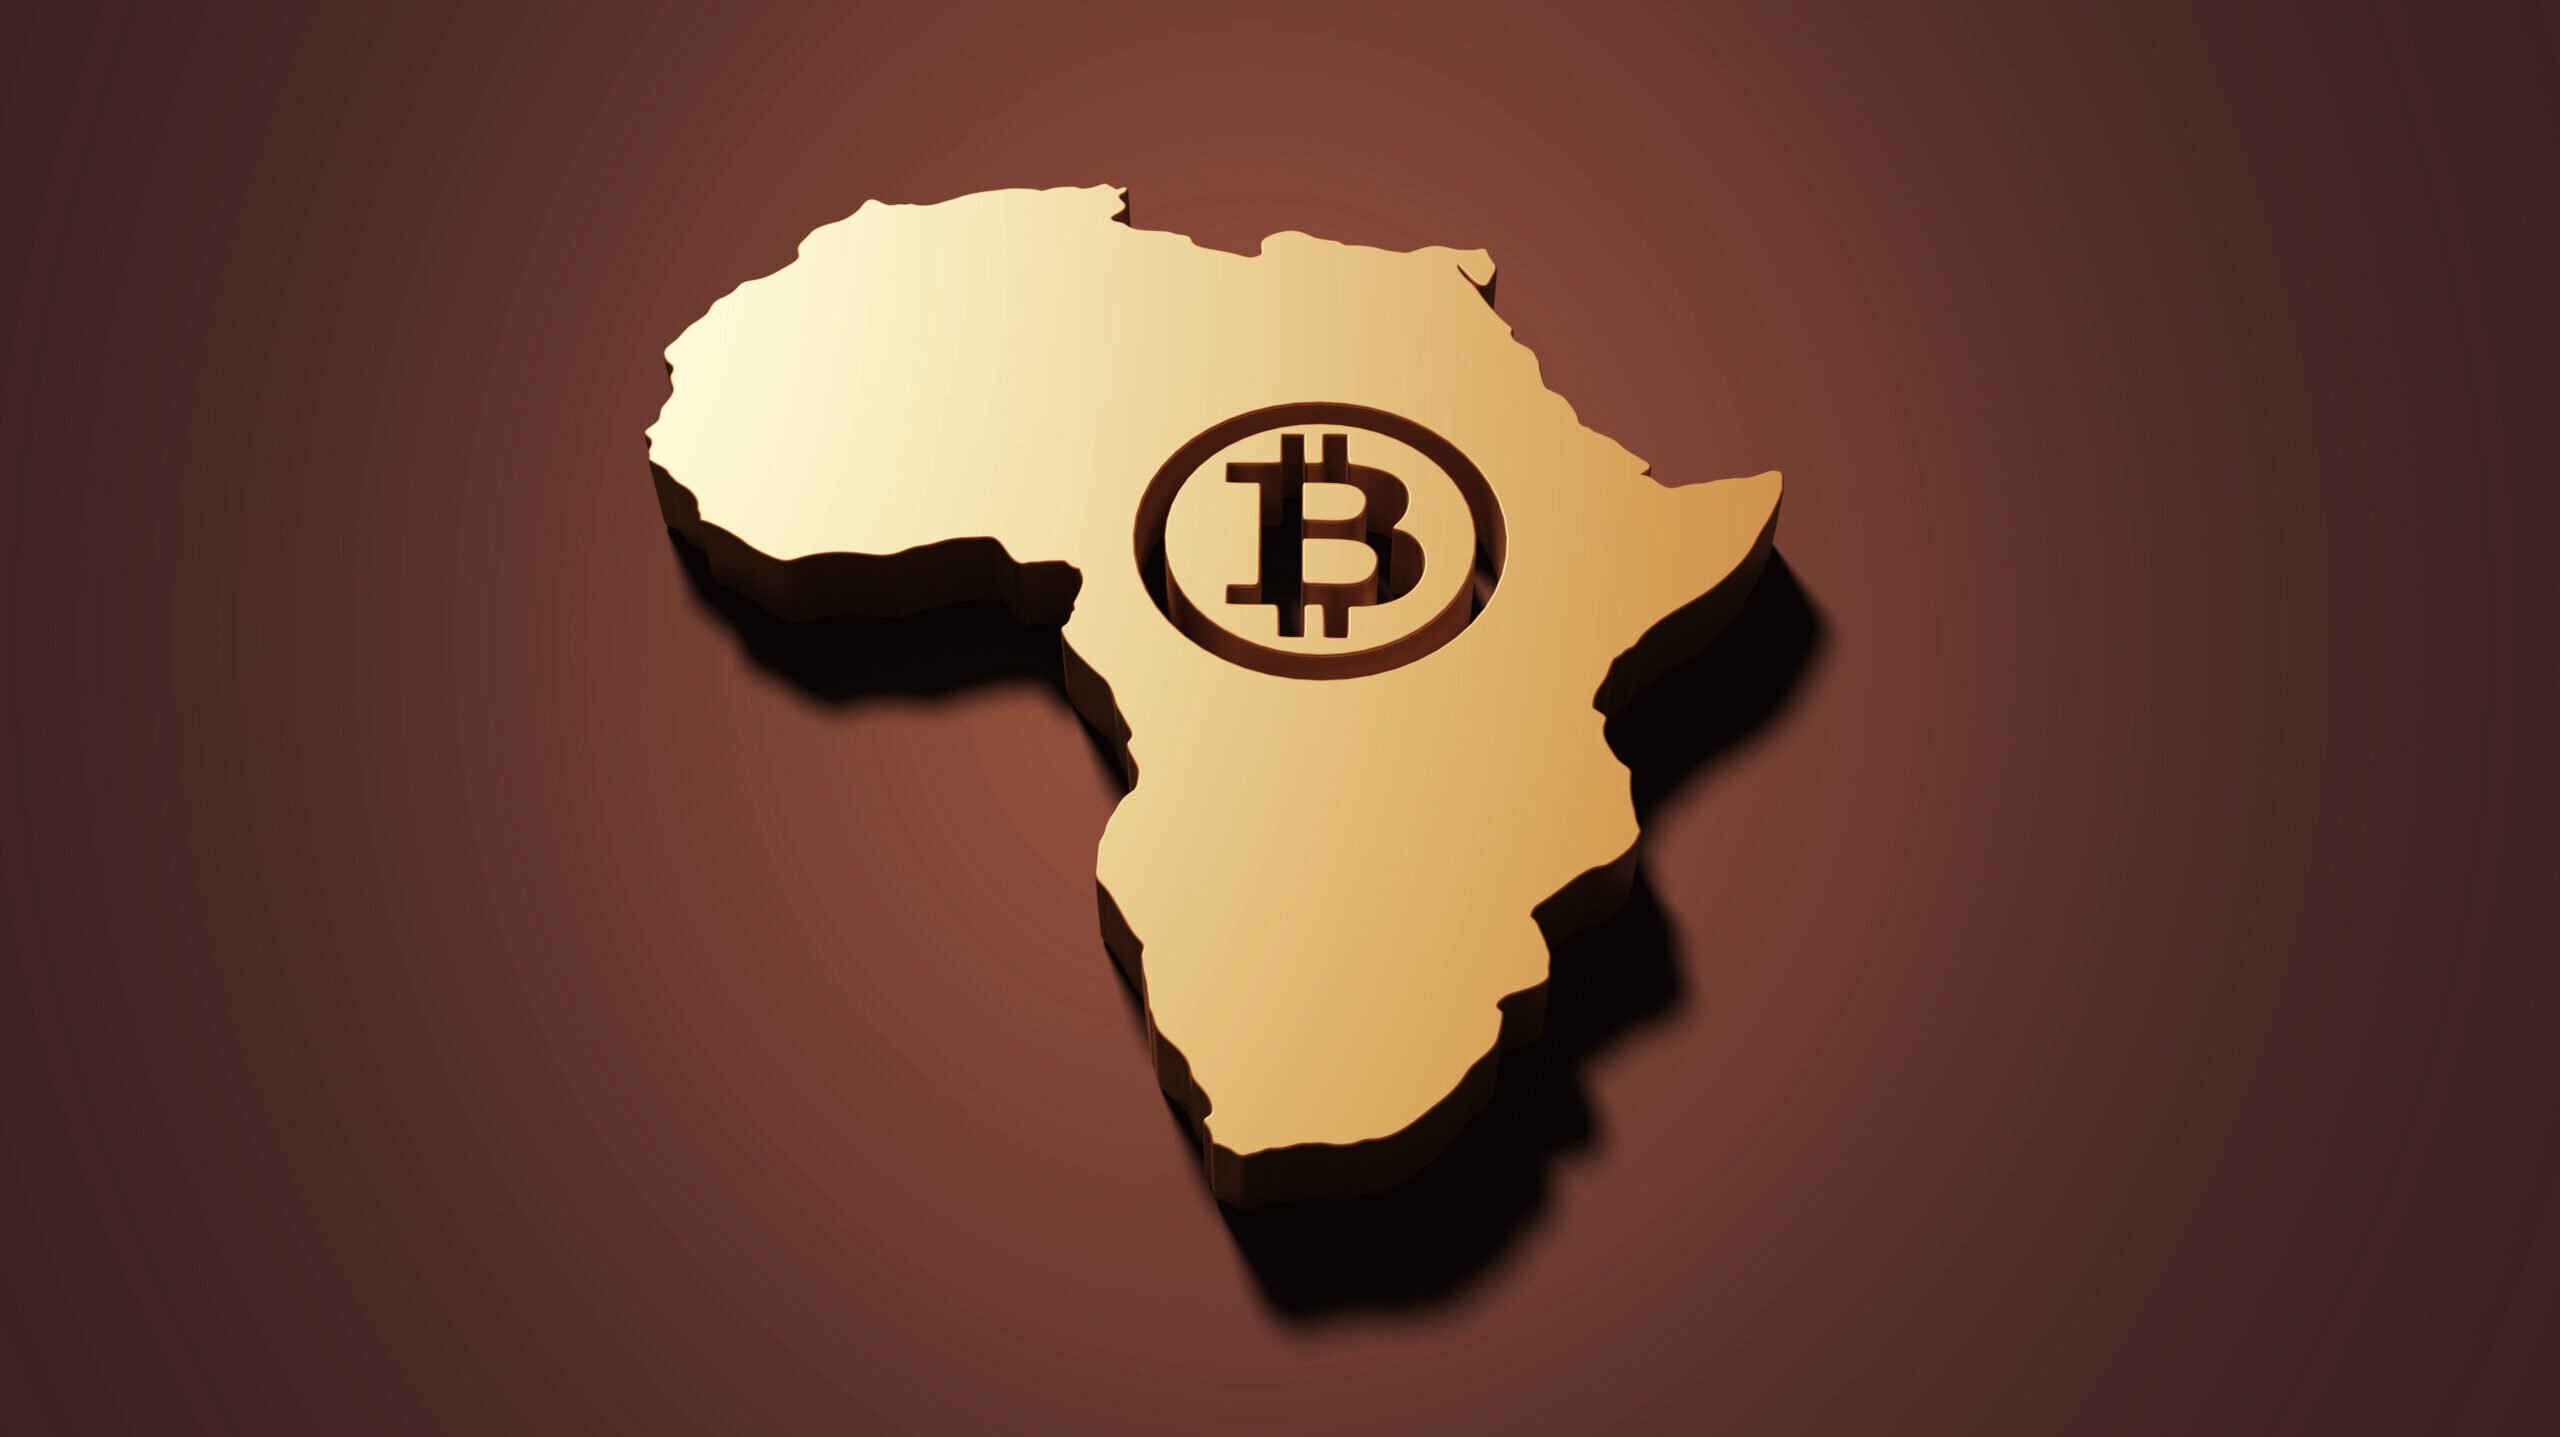 Central African Republic Didn't Share Bitcoin Adoption Plans With Central Bank: Report